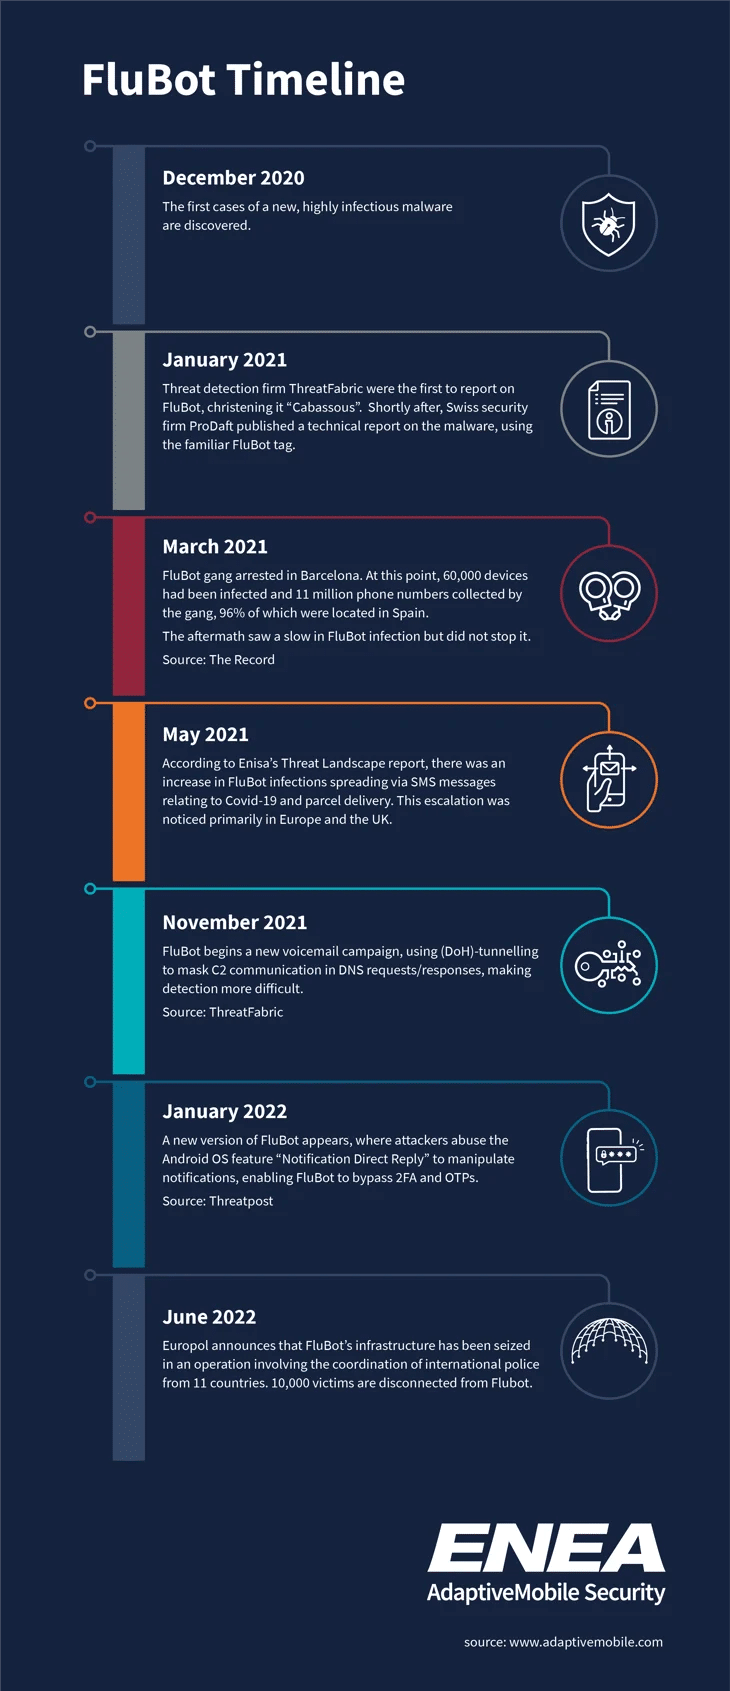 Timeline of the spread of FluBot malware